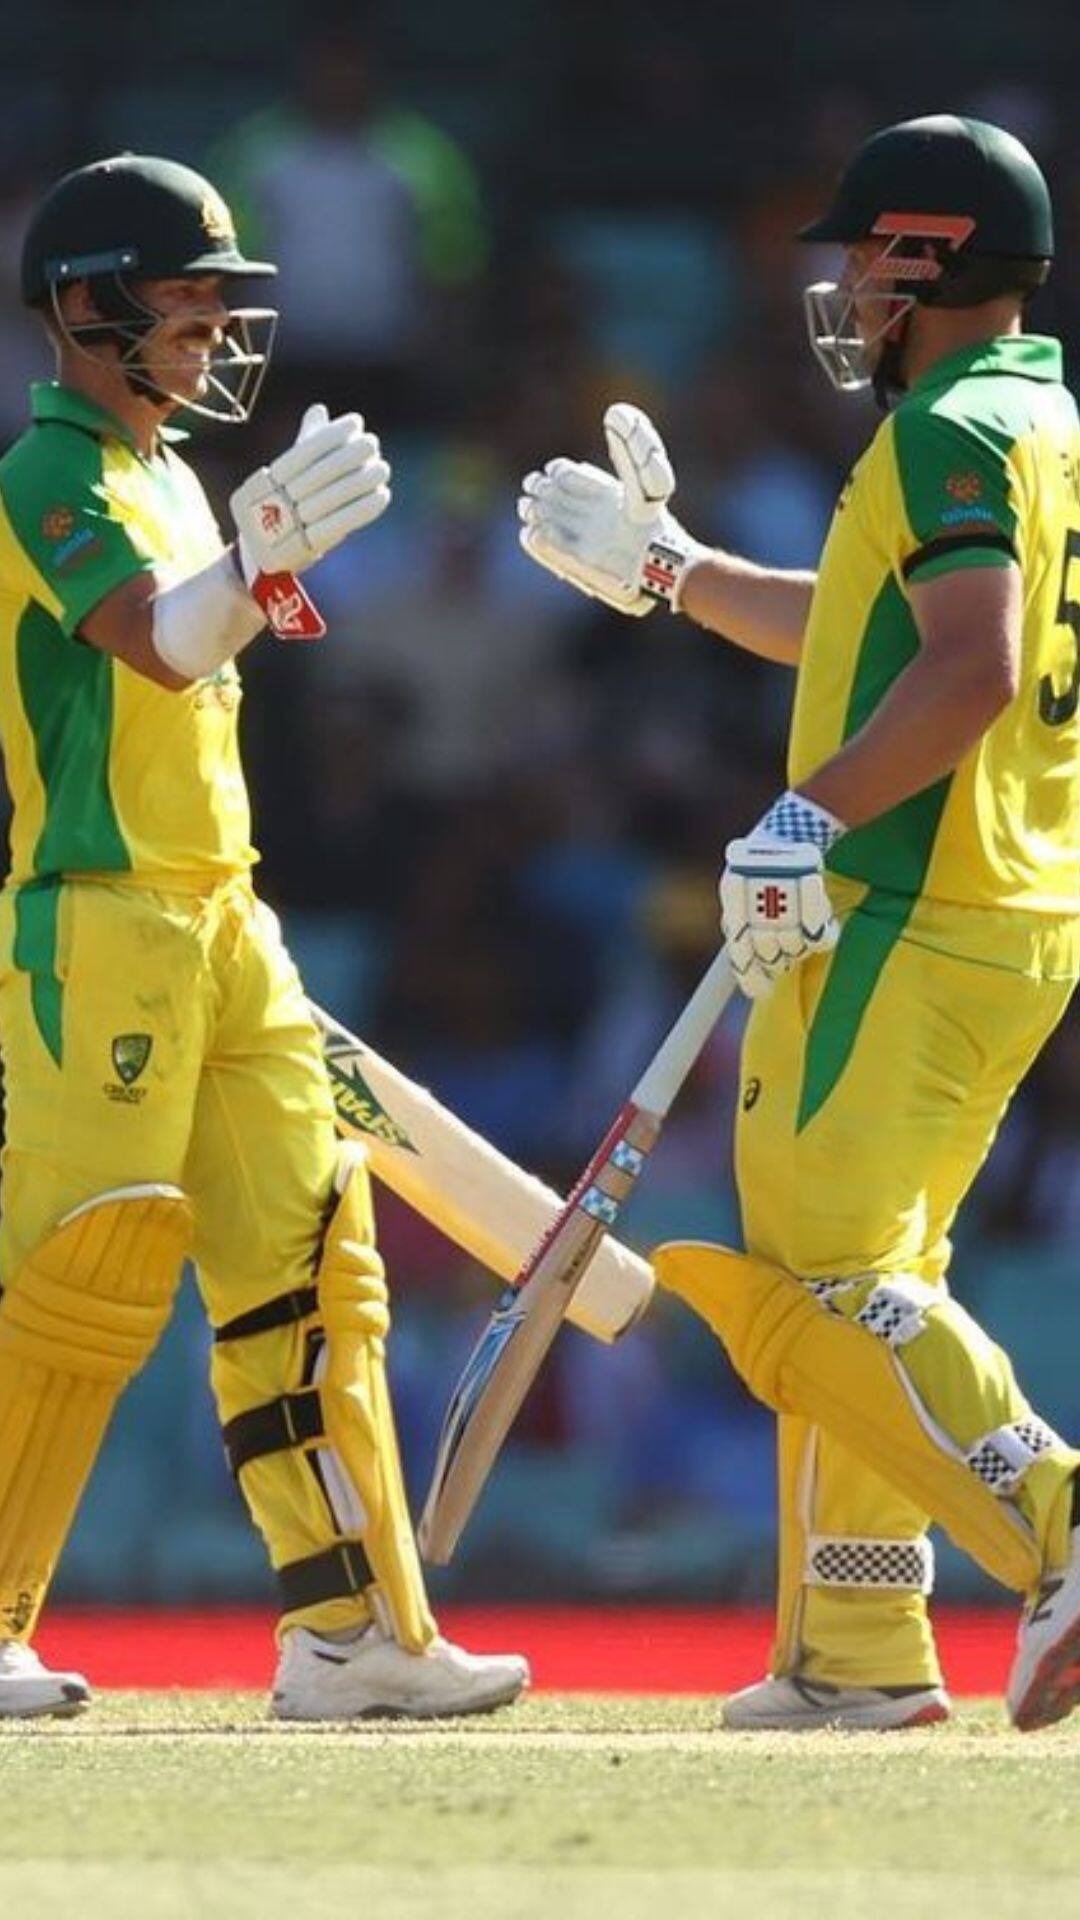 Australia Beat Pakistan by 62 Runs and Entered into 4th Place in ICC Cricket World Cup 2023 Points Table rsk